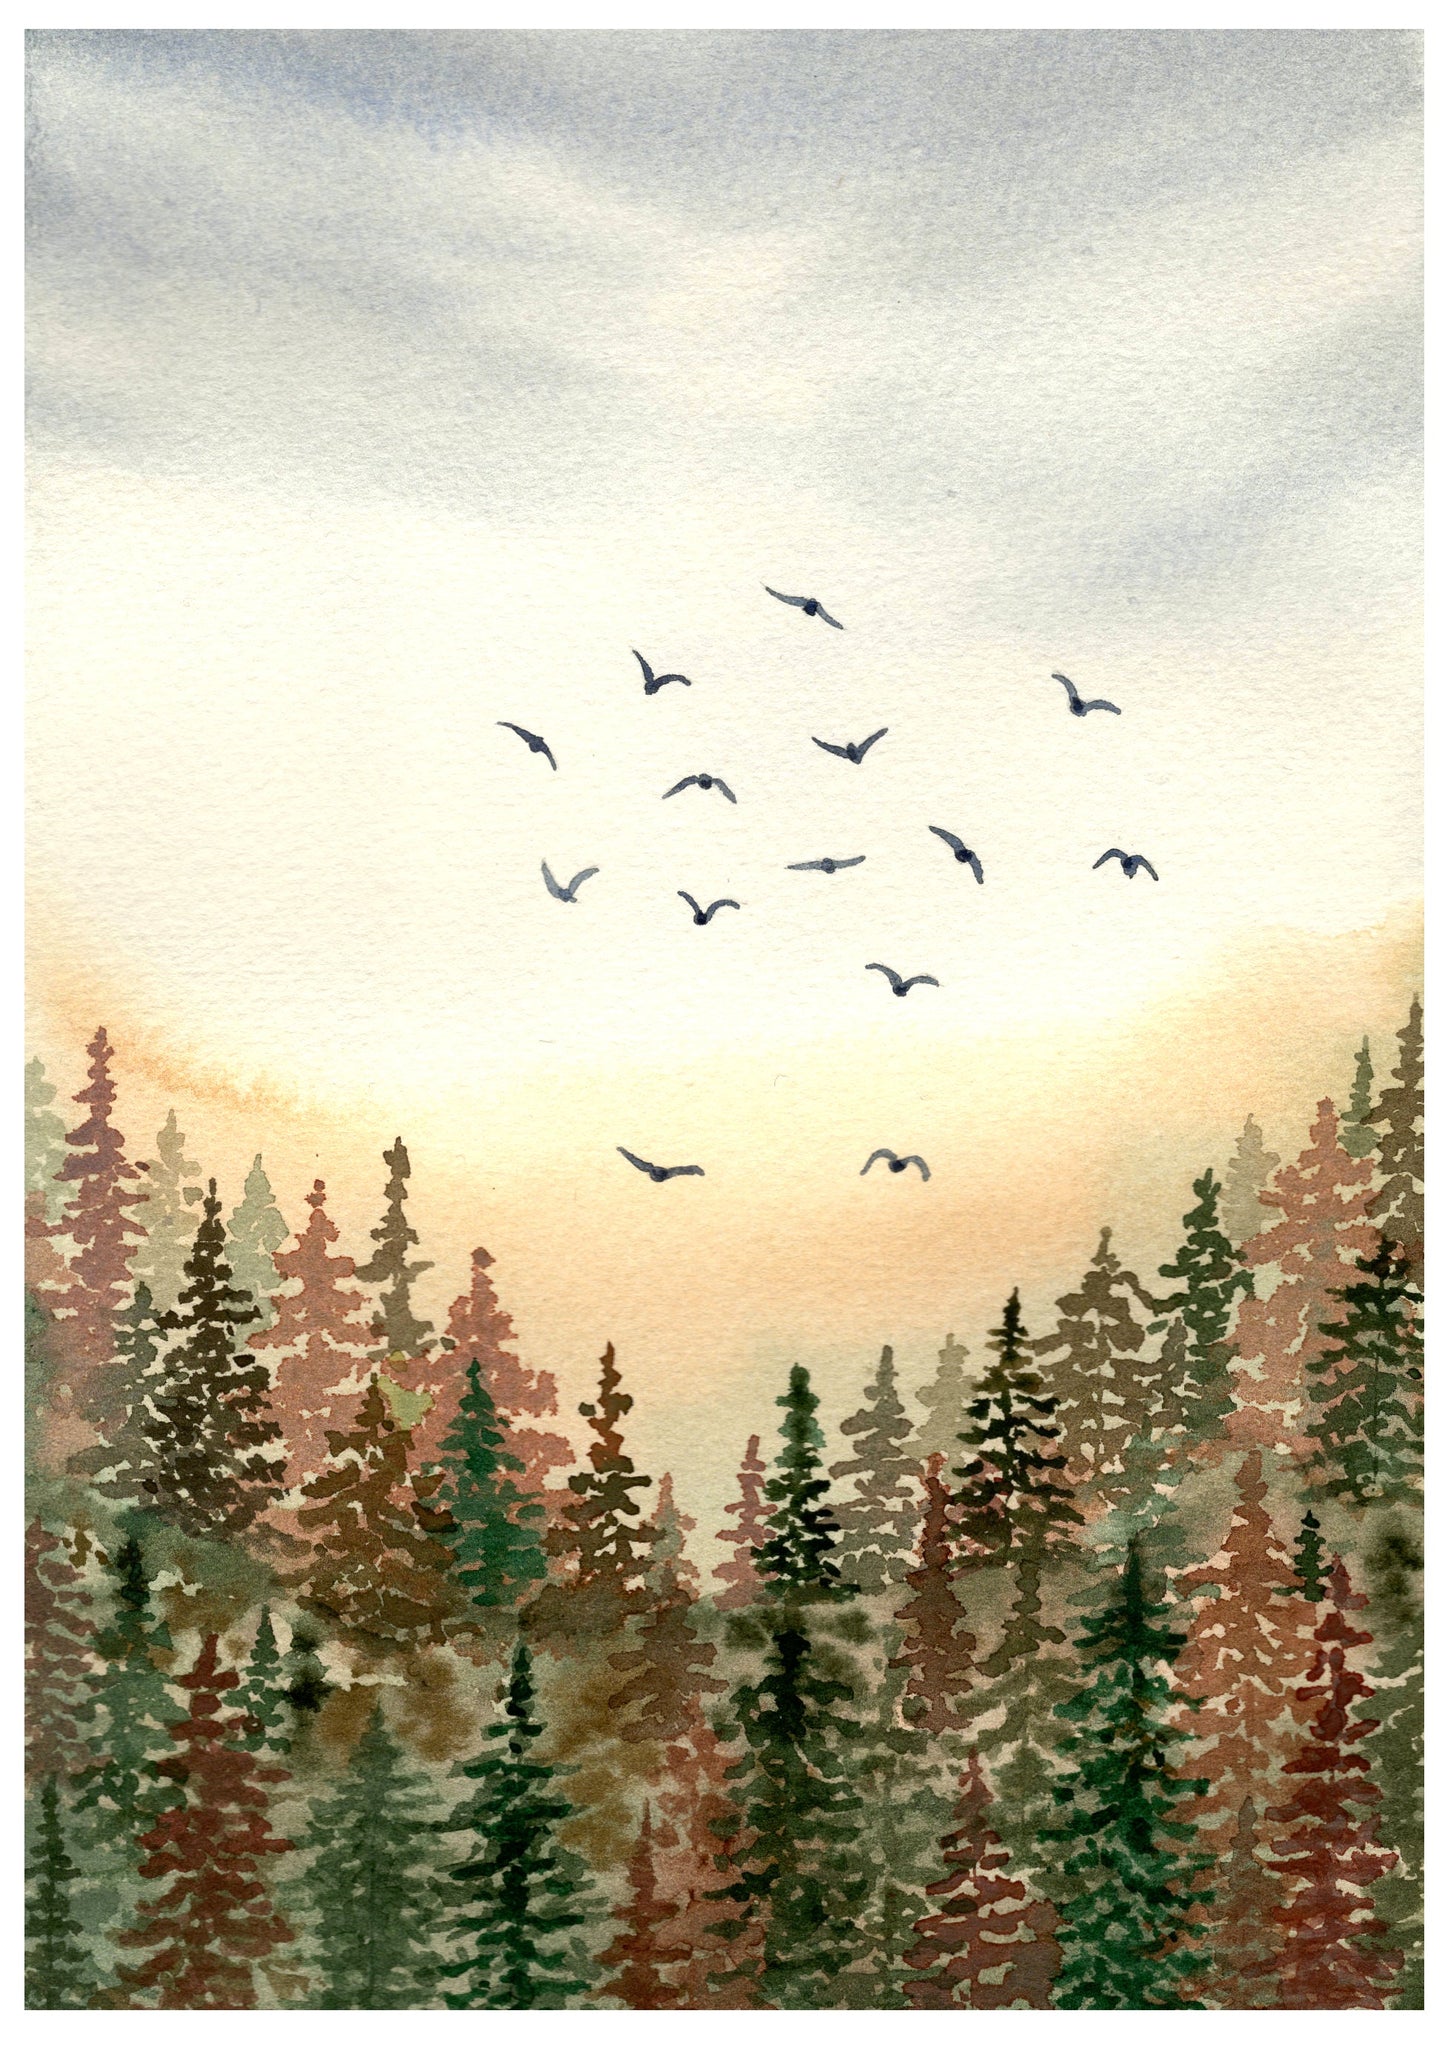 Into the Wild - Limited Edition Archival Print Wholesale